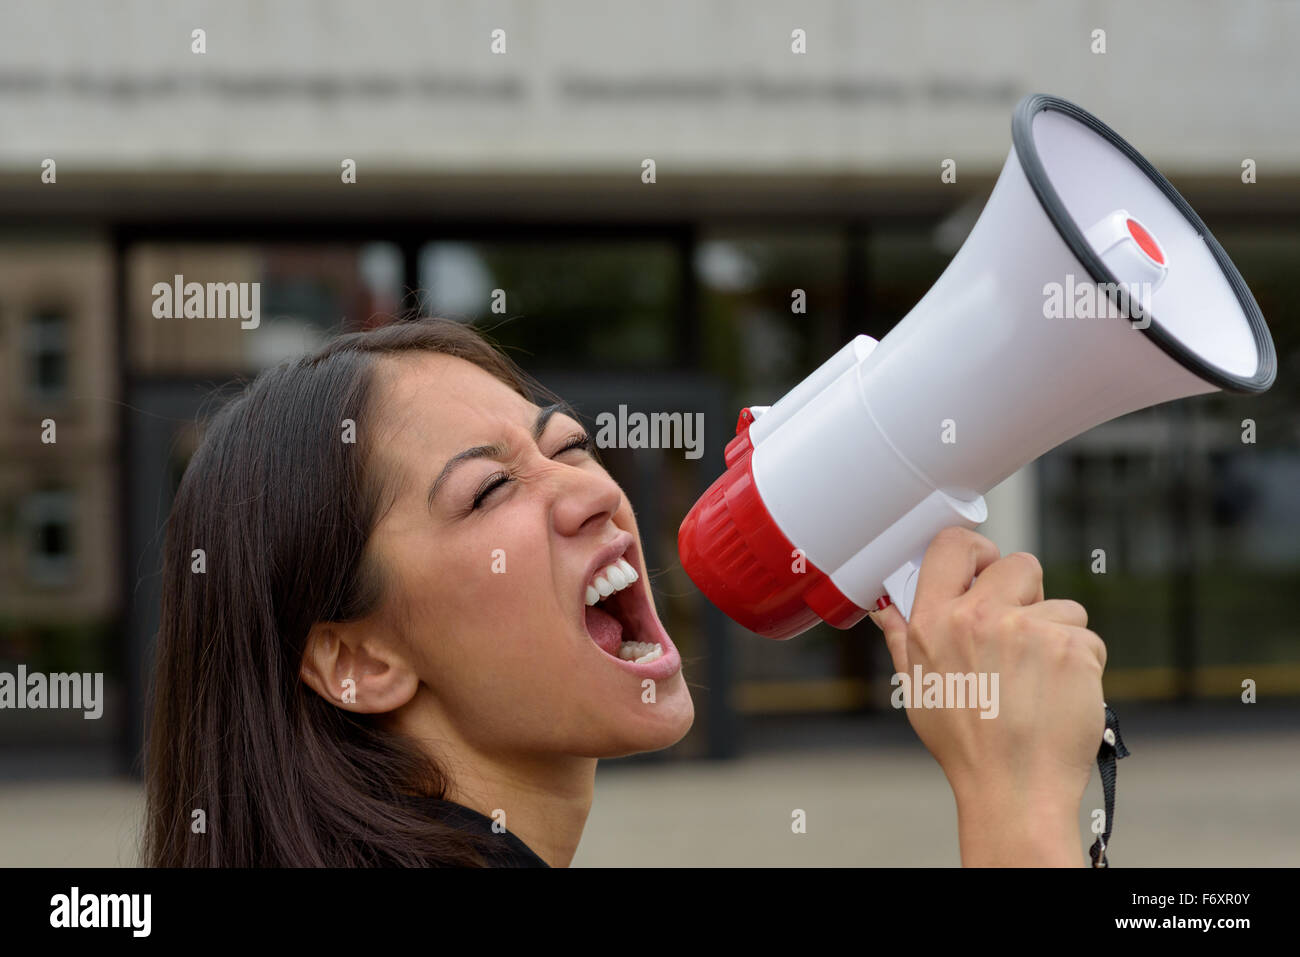 Angry young woman yelling over a megaphone or bullhorn as she participates in a street demonstration or protest airing her griev Stock Photo